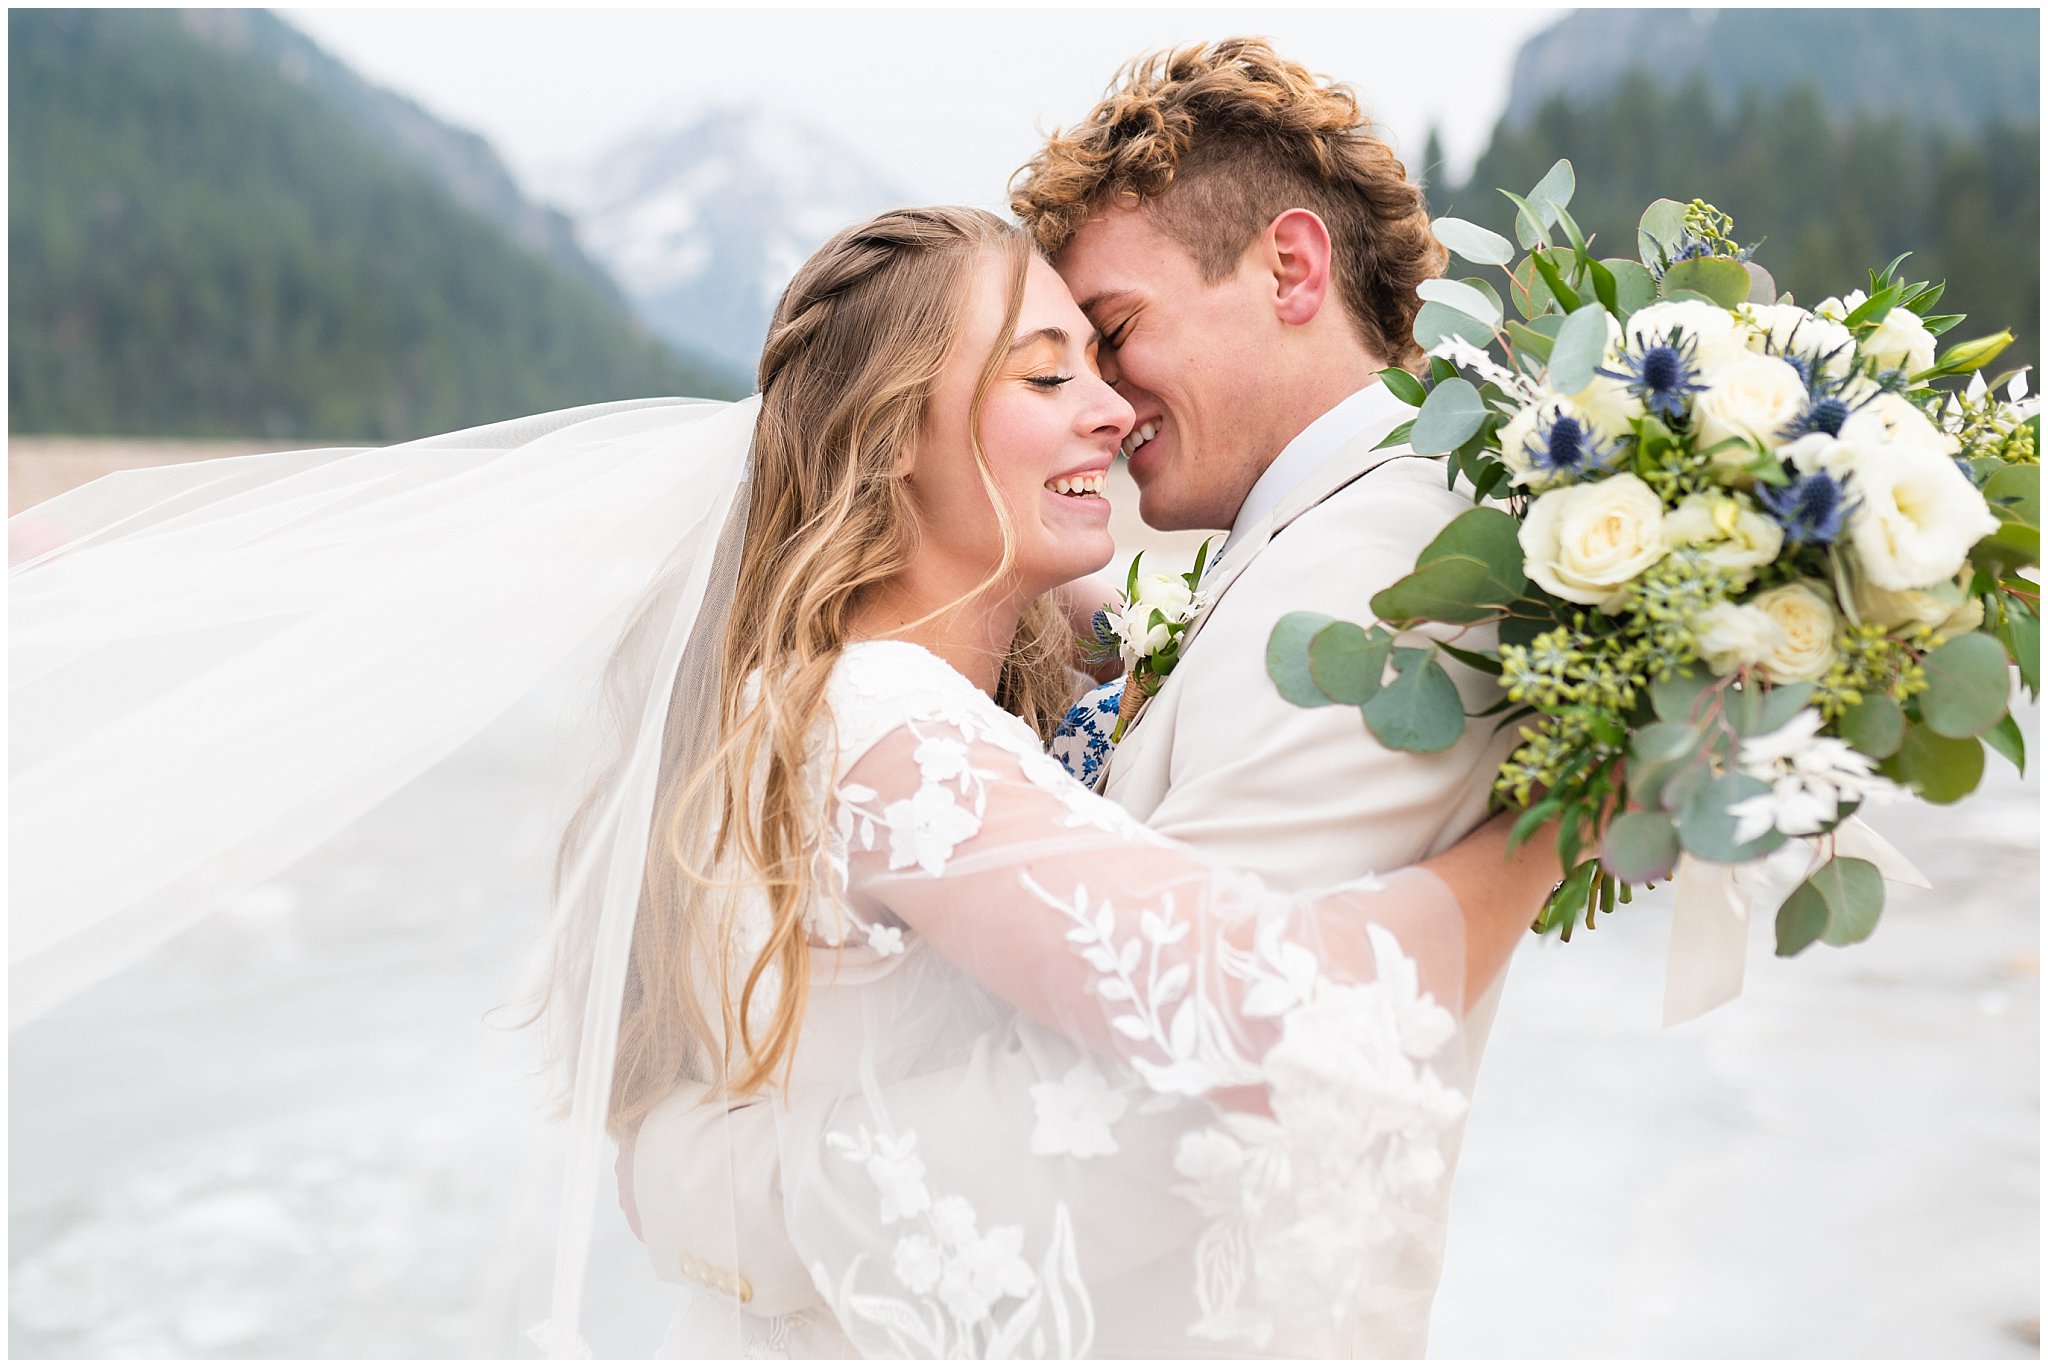 Bride in the mountains on frozen lake wearing lace dress with veil and white floral bouquet | Tibble Fork Winter Formal Session | Jessie and Dallin Photography